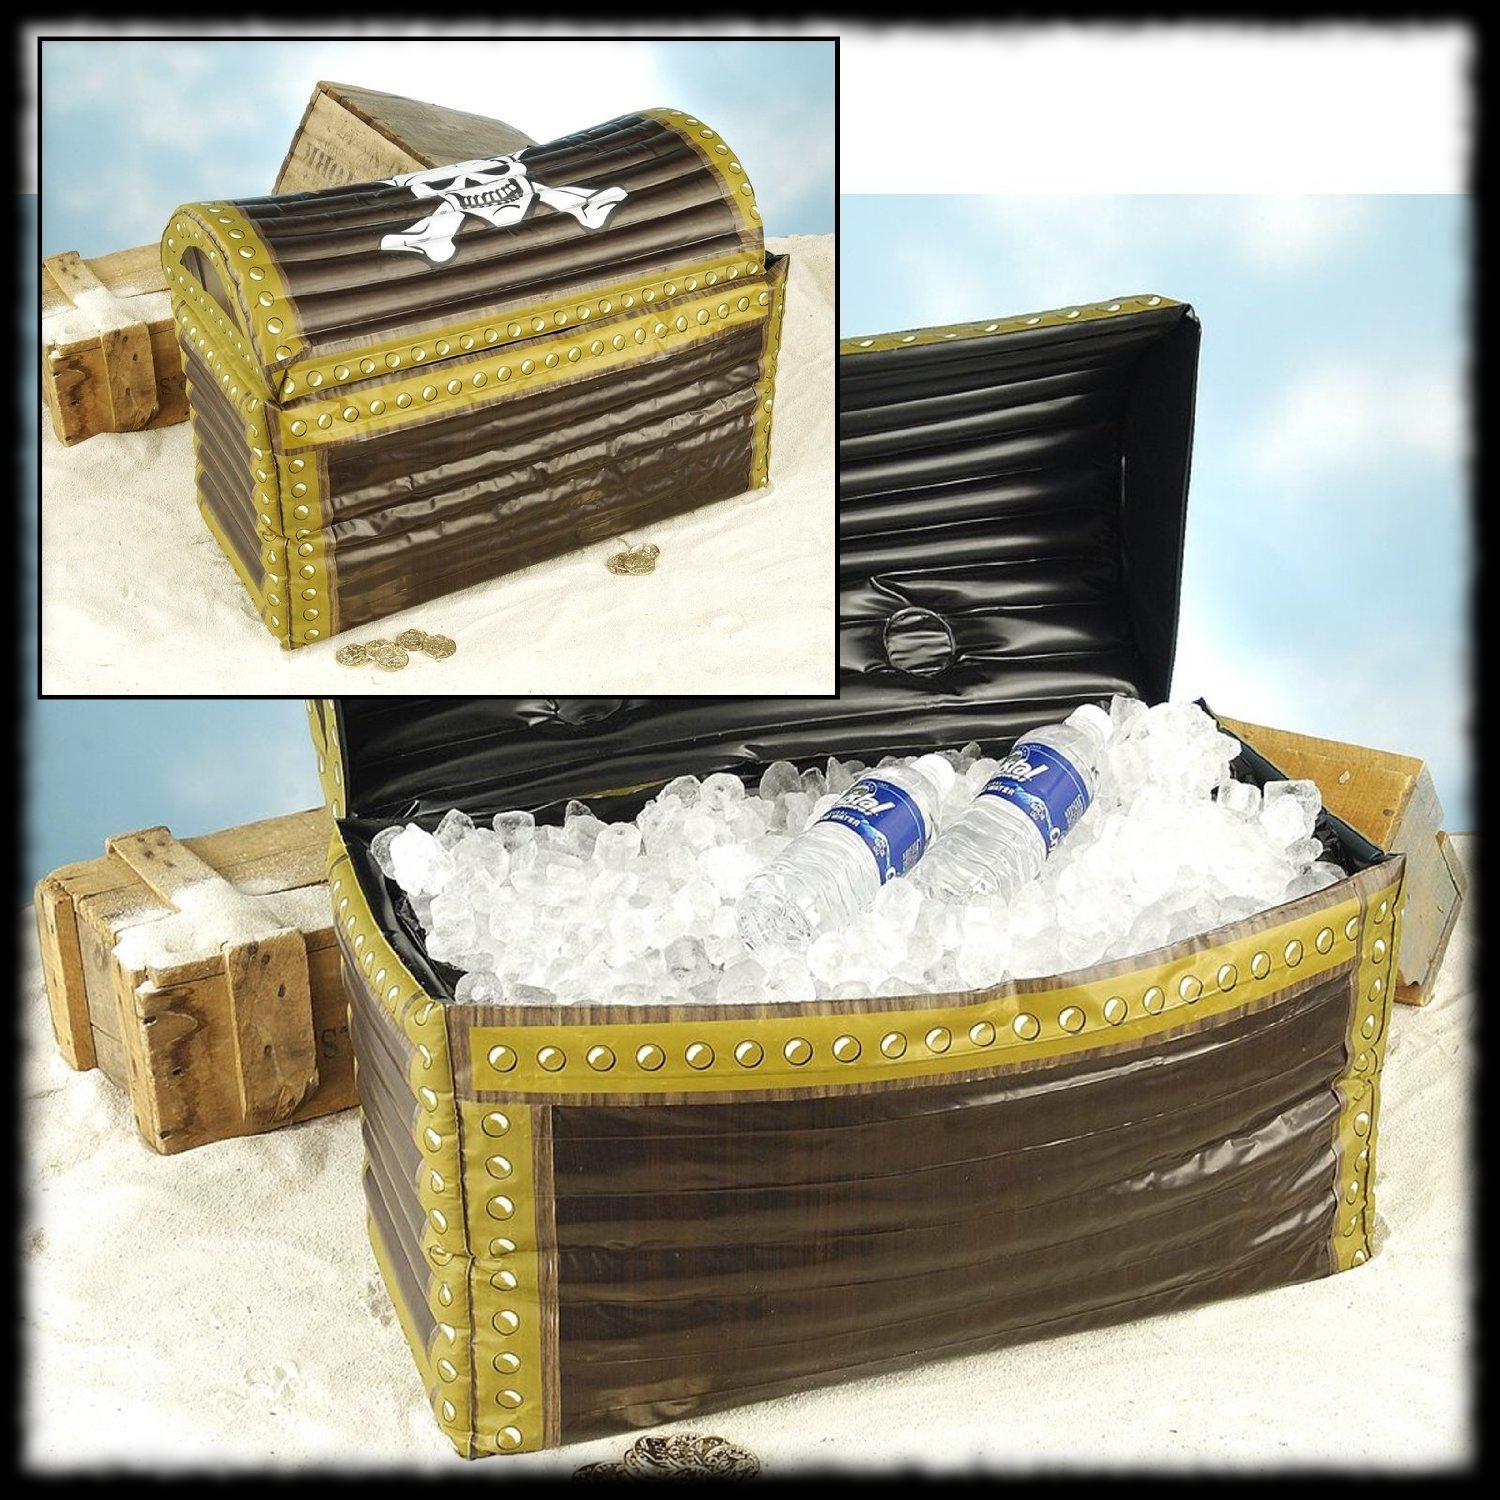 Inflatable Pirate Chest Cooler Party Ideas for Halloween